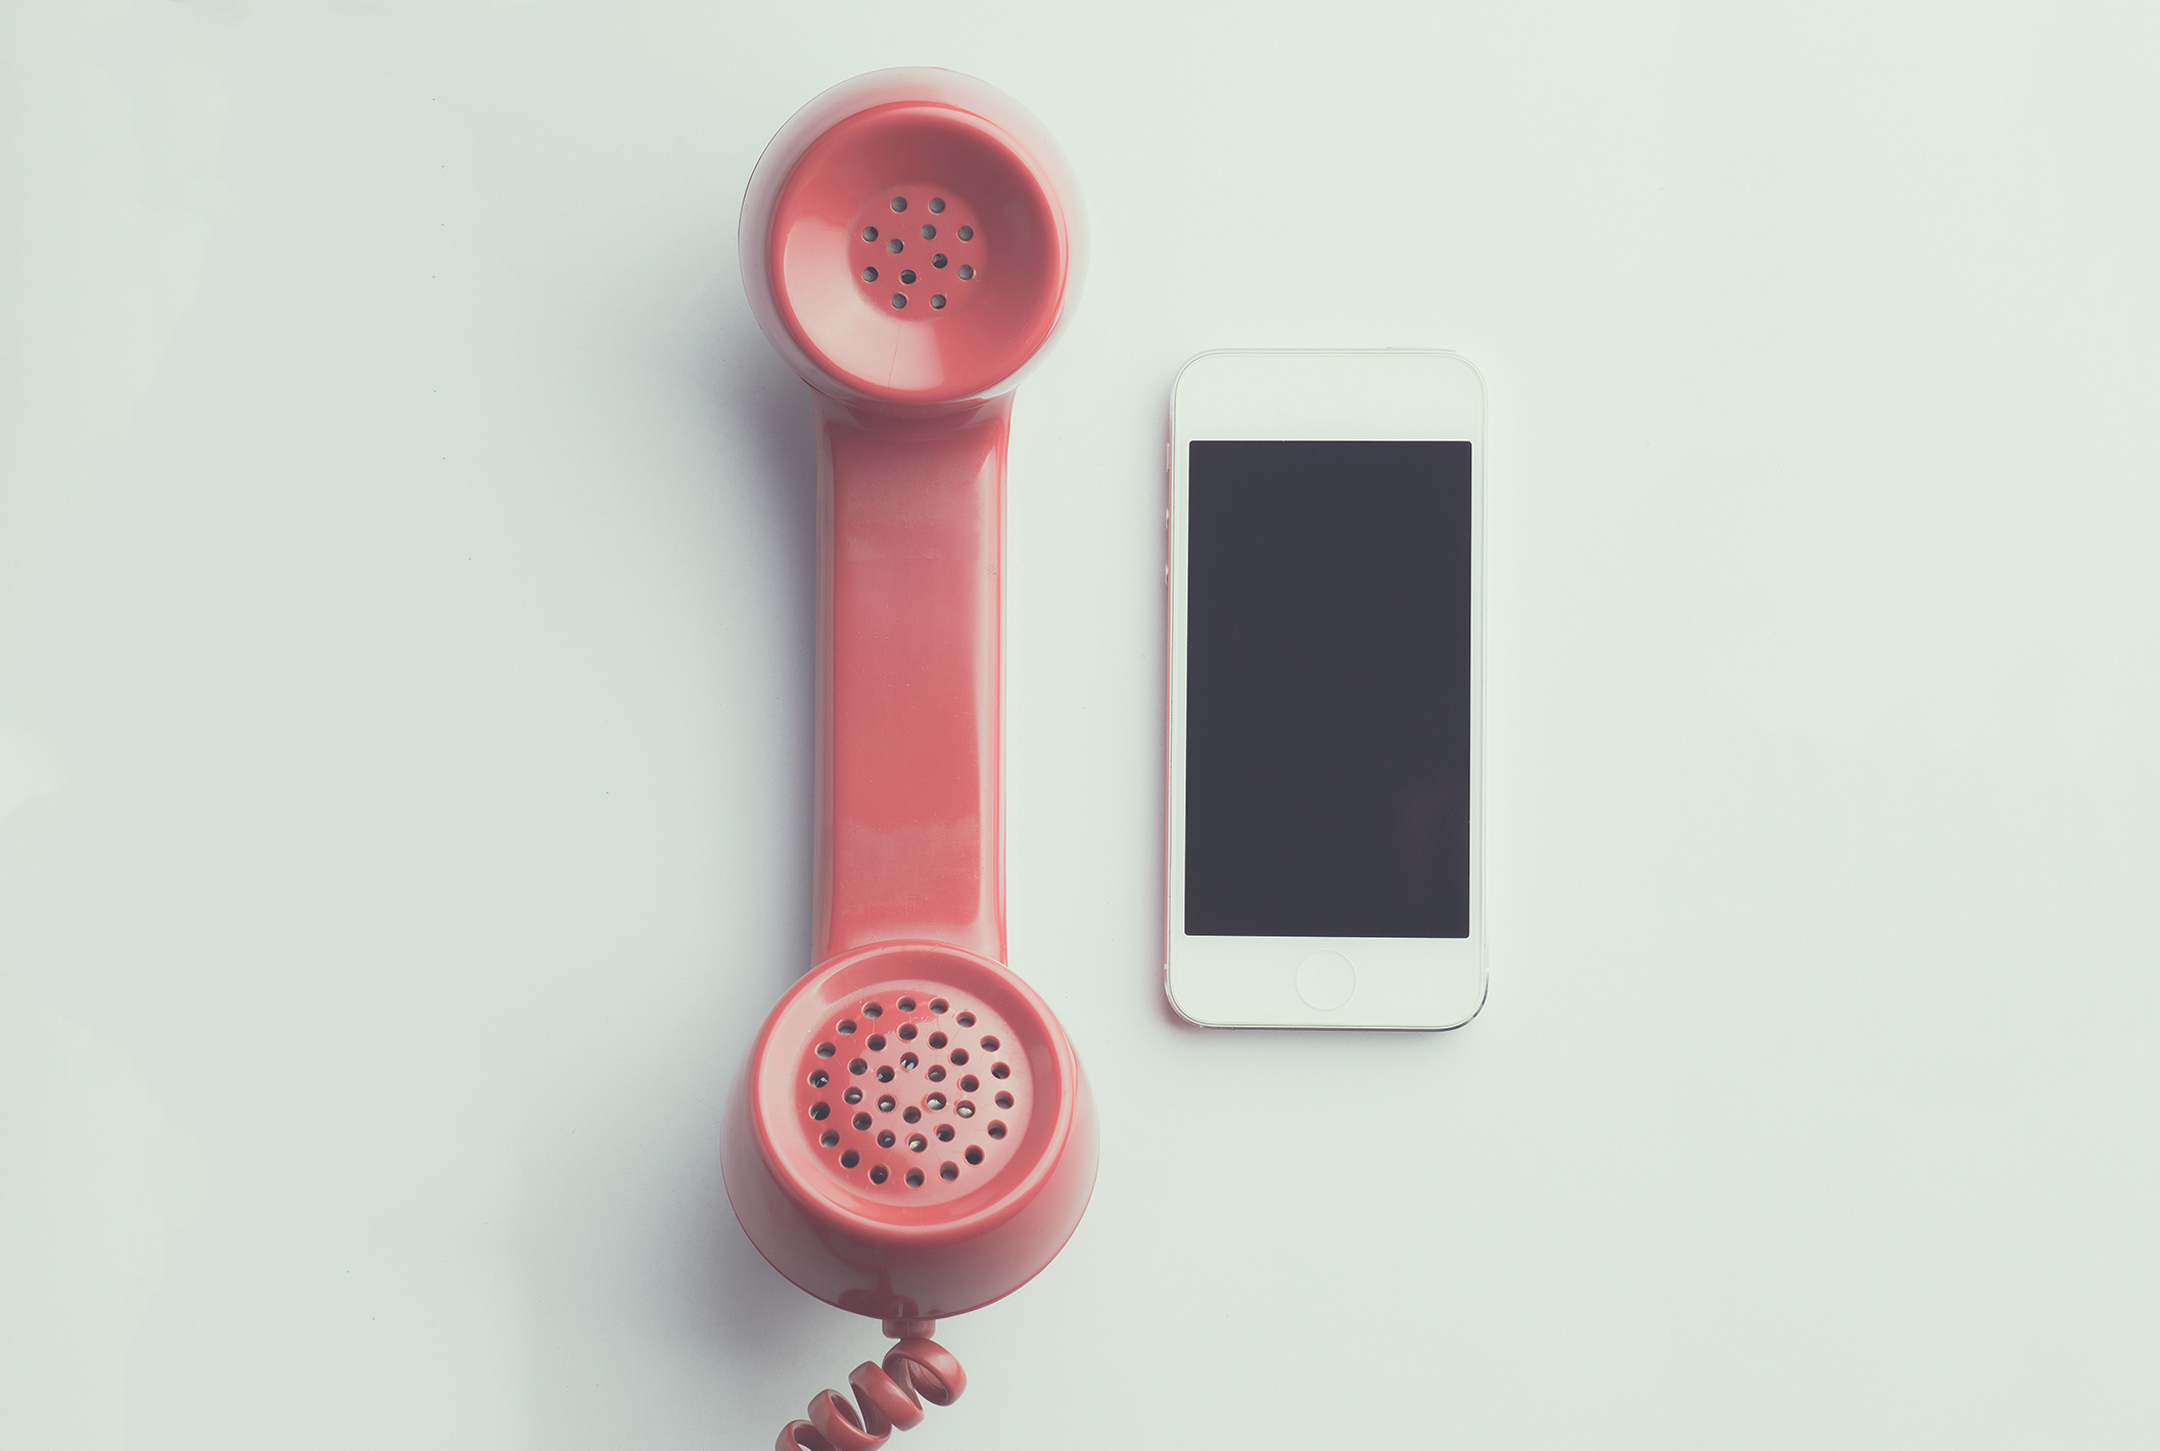 flat-lay-photography-of-red-anti-radiation-handset-telephone-beside-iphone-594452 phone_1650958599.jpeg NEOSiAM 2021 at Pexels